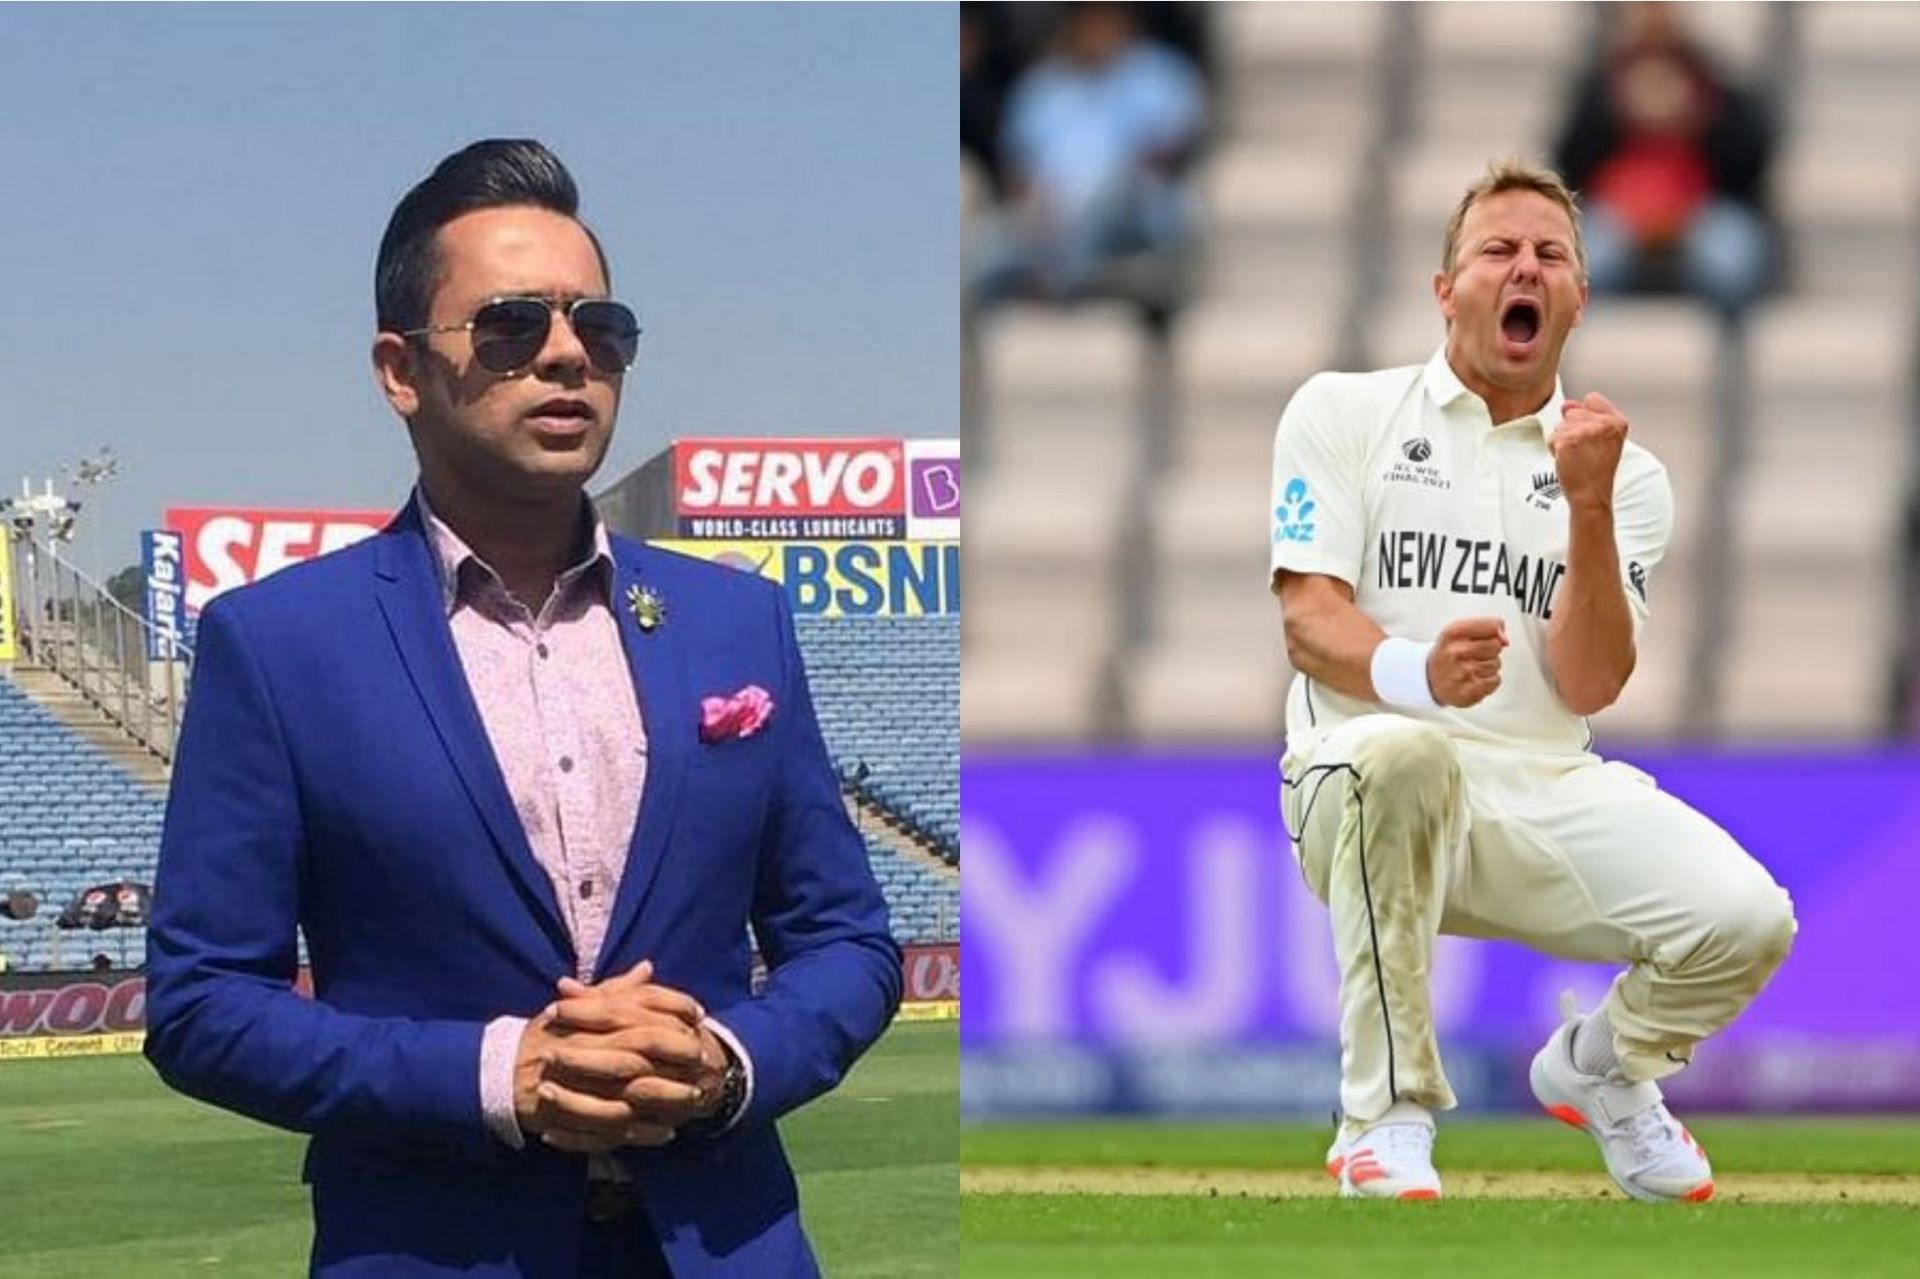 Aakash Chopra (L) censured that New Zealand made a mistake by not playing Neil Wagner (R).